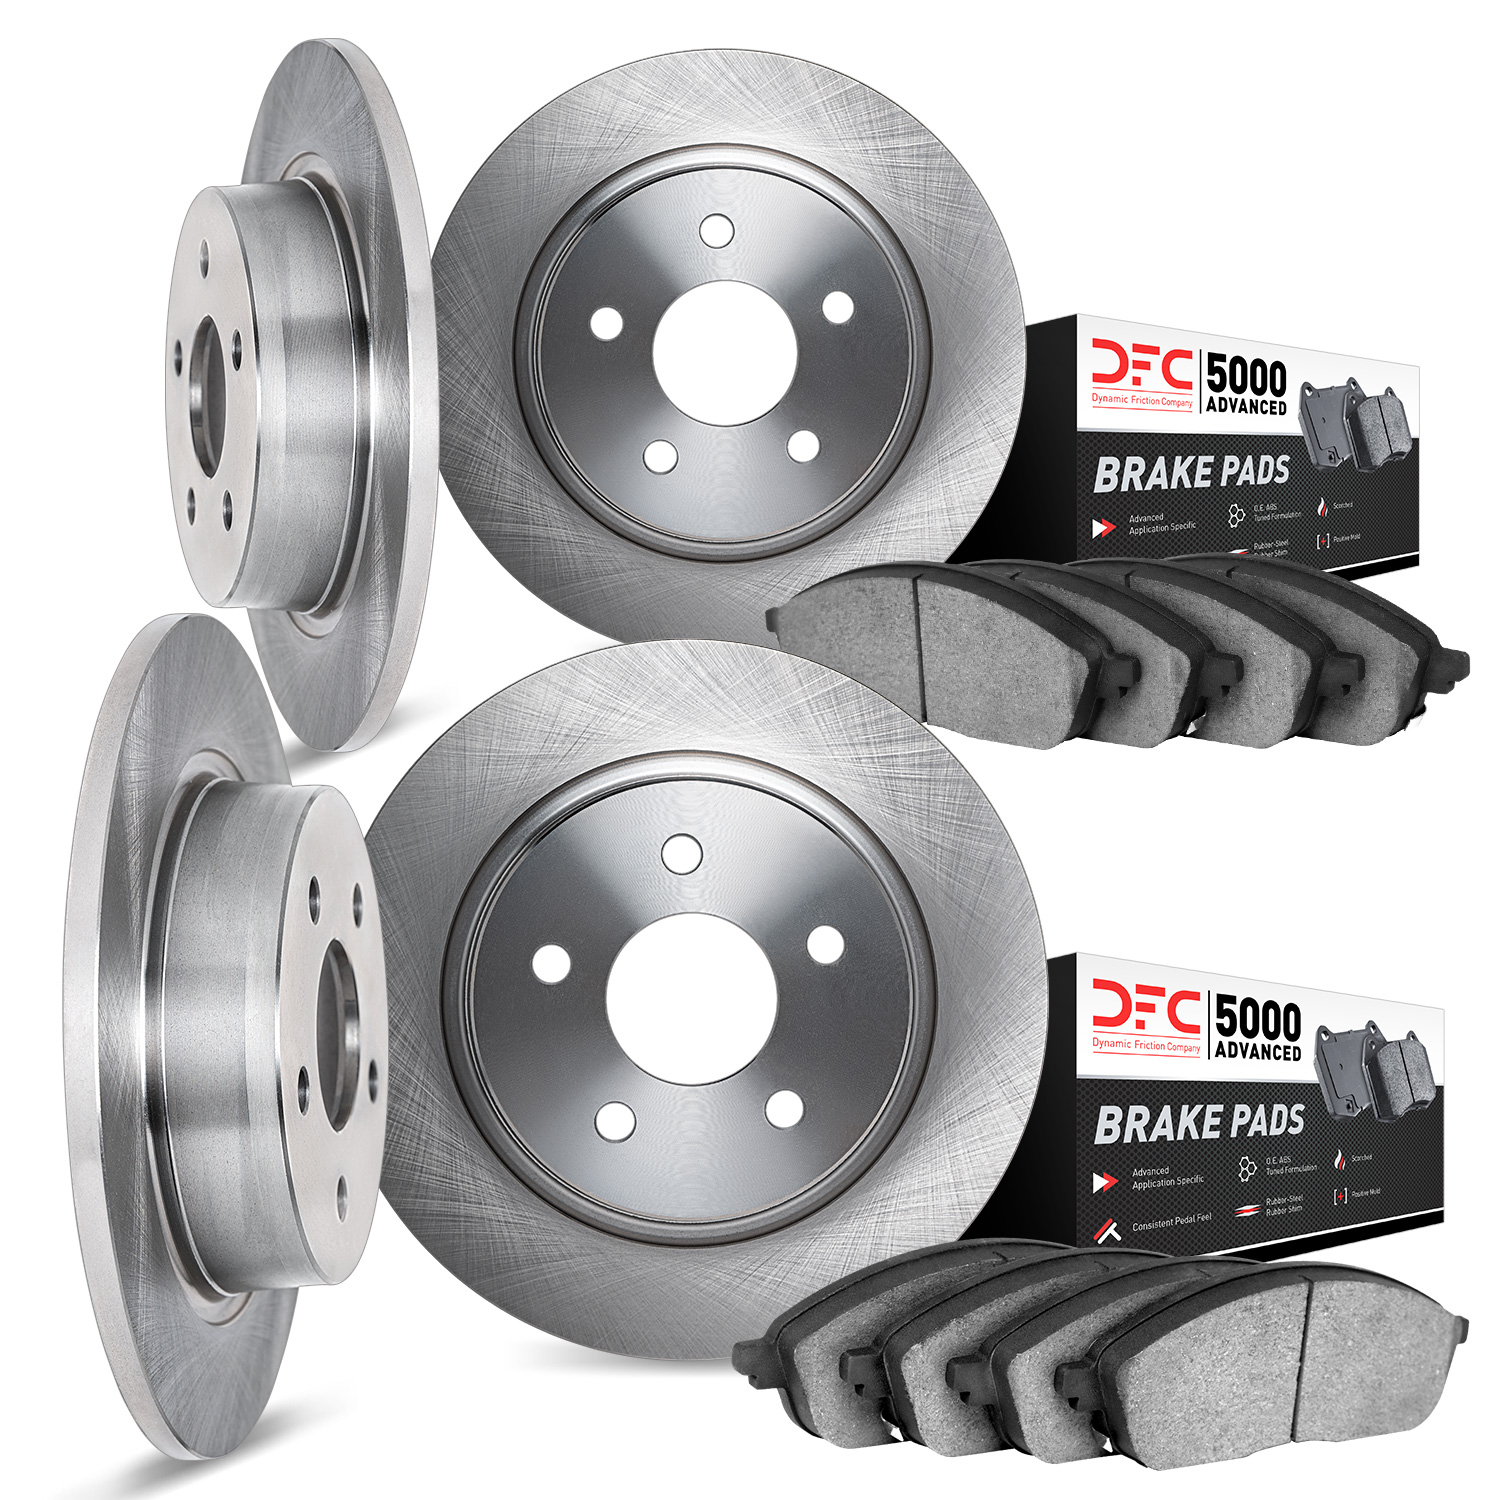 6504-31003 Brake Rotors w/5000 Advanced Brake Pads Kit, 1976-1976 BMW, Position: Front and Rear